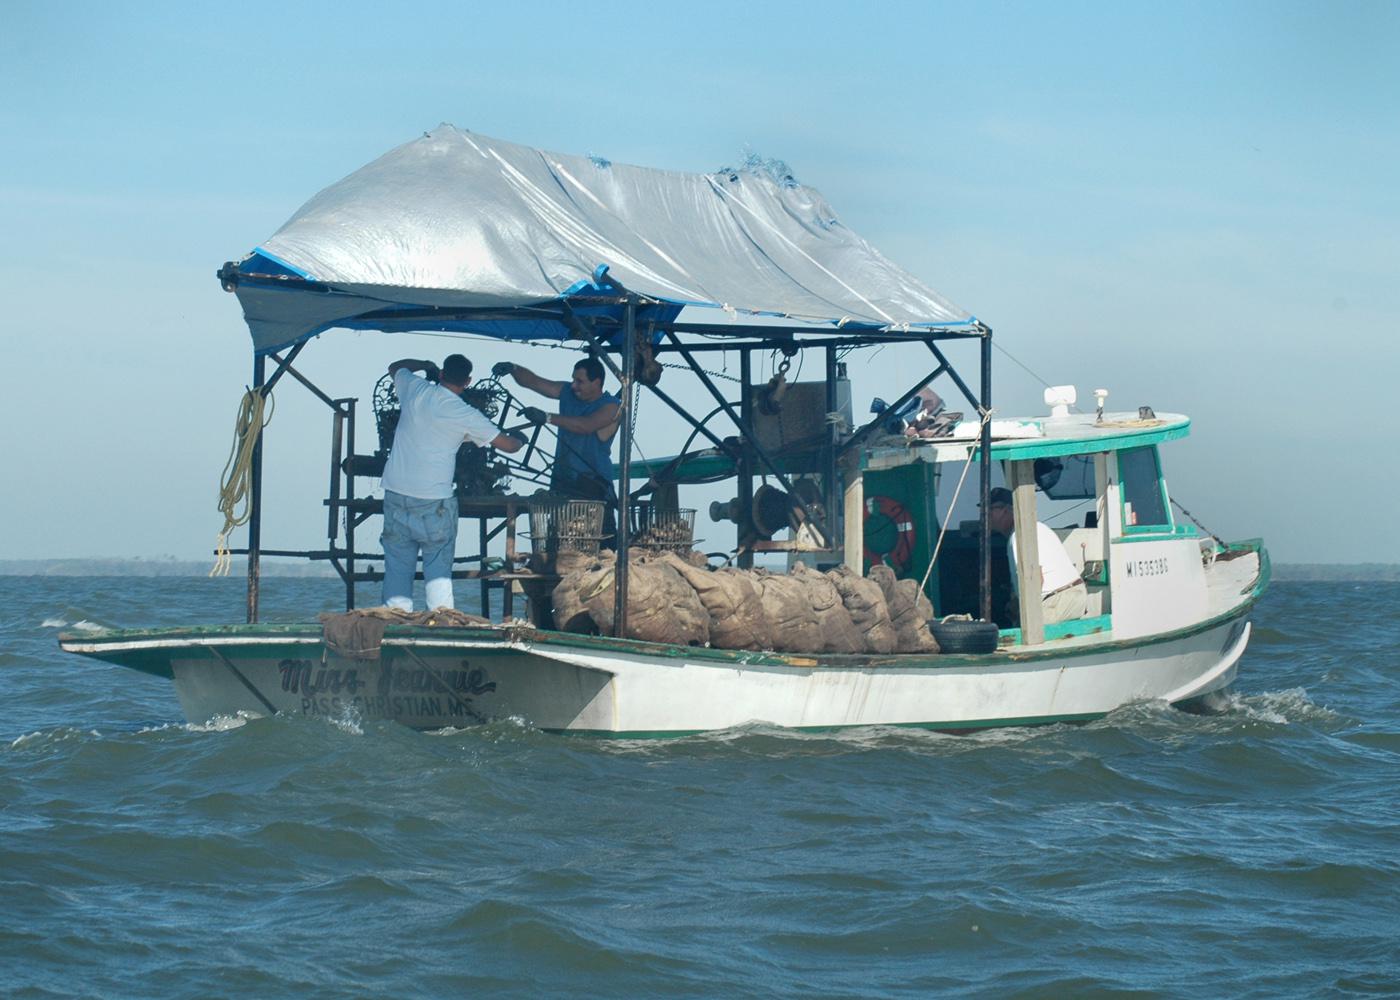 The Miss Jeannie out of Pass Christian was one of the boats harvesting oysters on the St. Joe Reef near Bayou Caddy in early October. (Photo by Bob Ratliff)